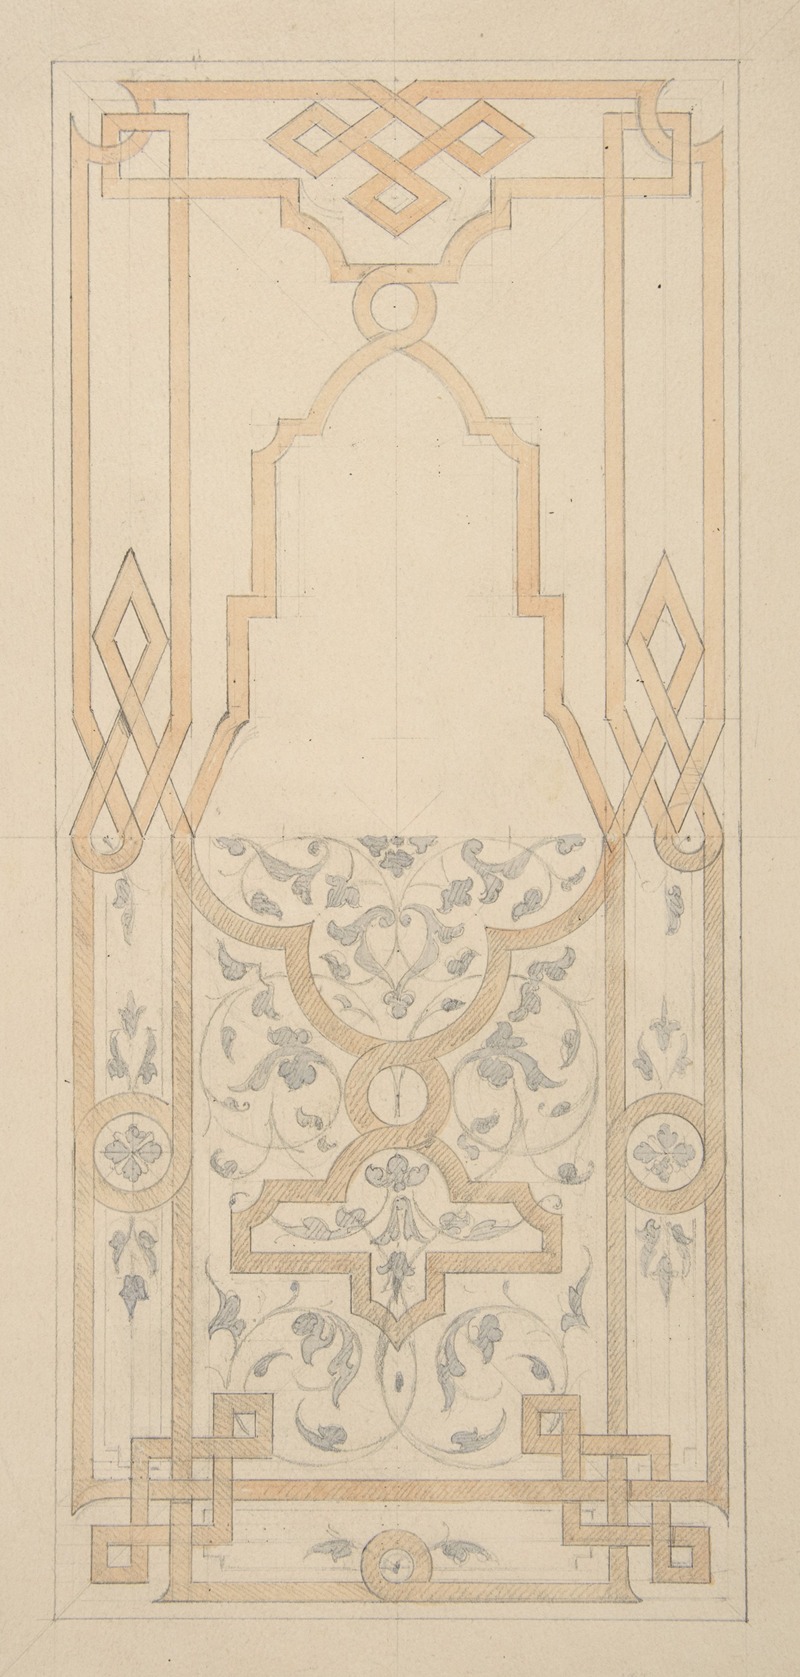 Jules-Edmond-Charles Lachaise - Design for a panel ornamented with strapwork and rinceaux